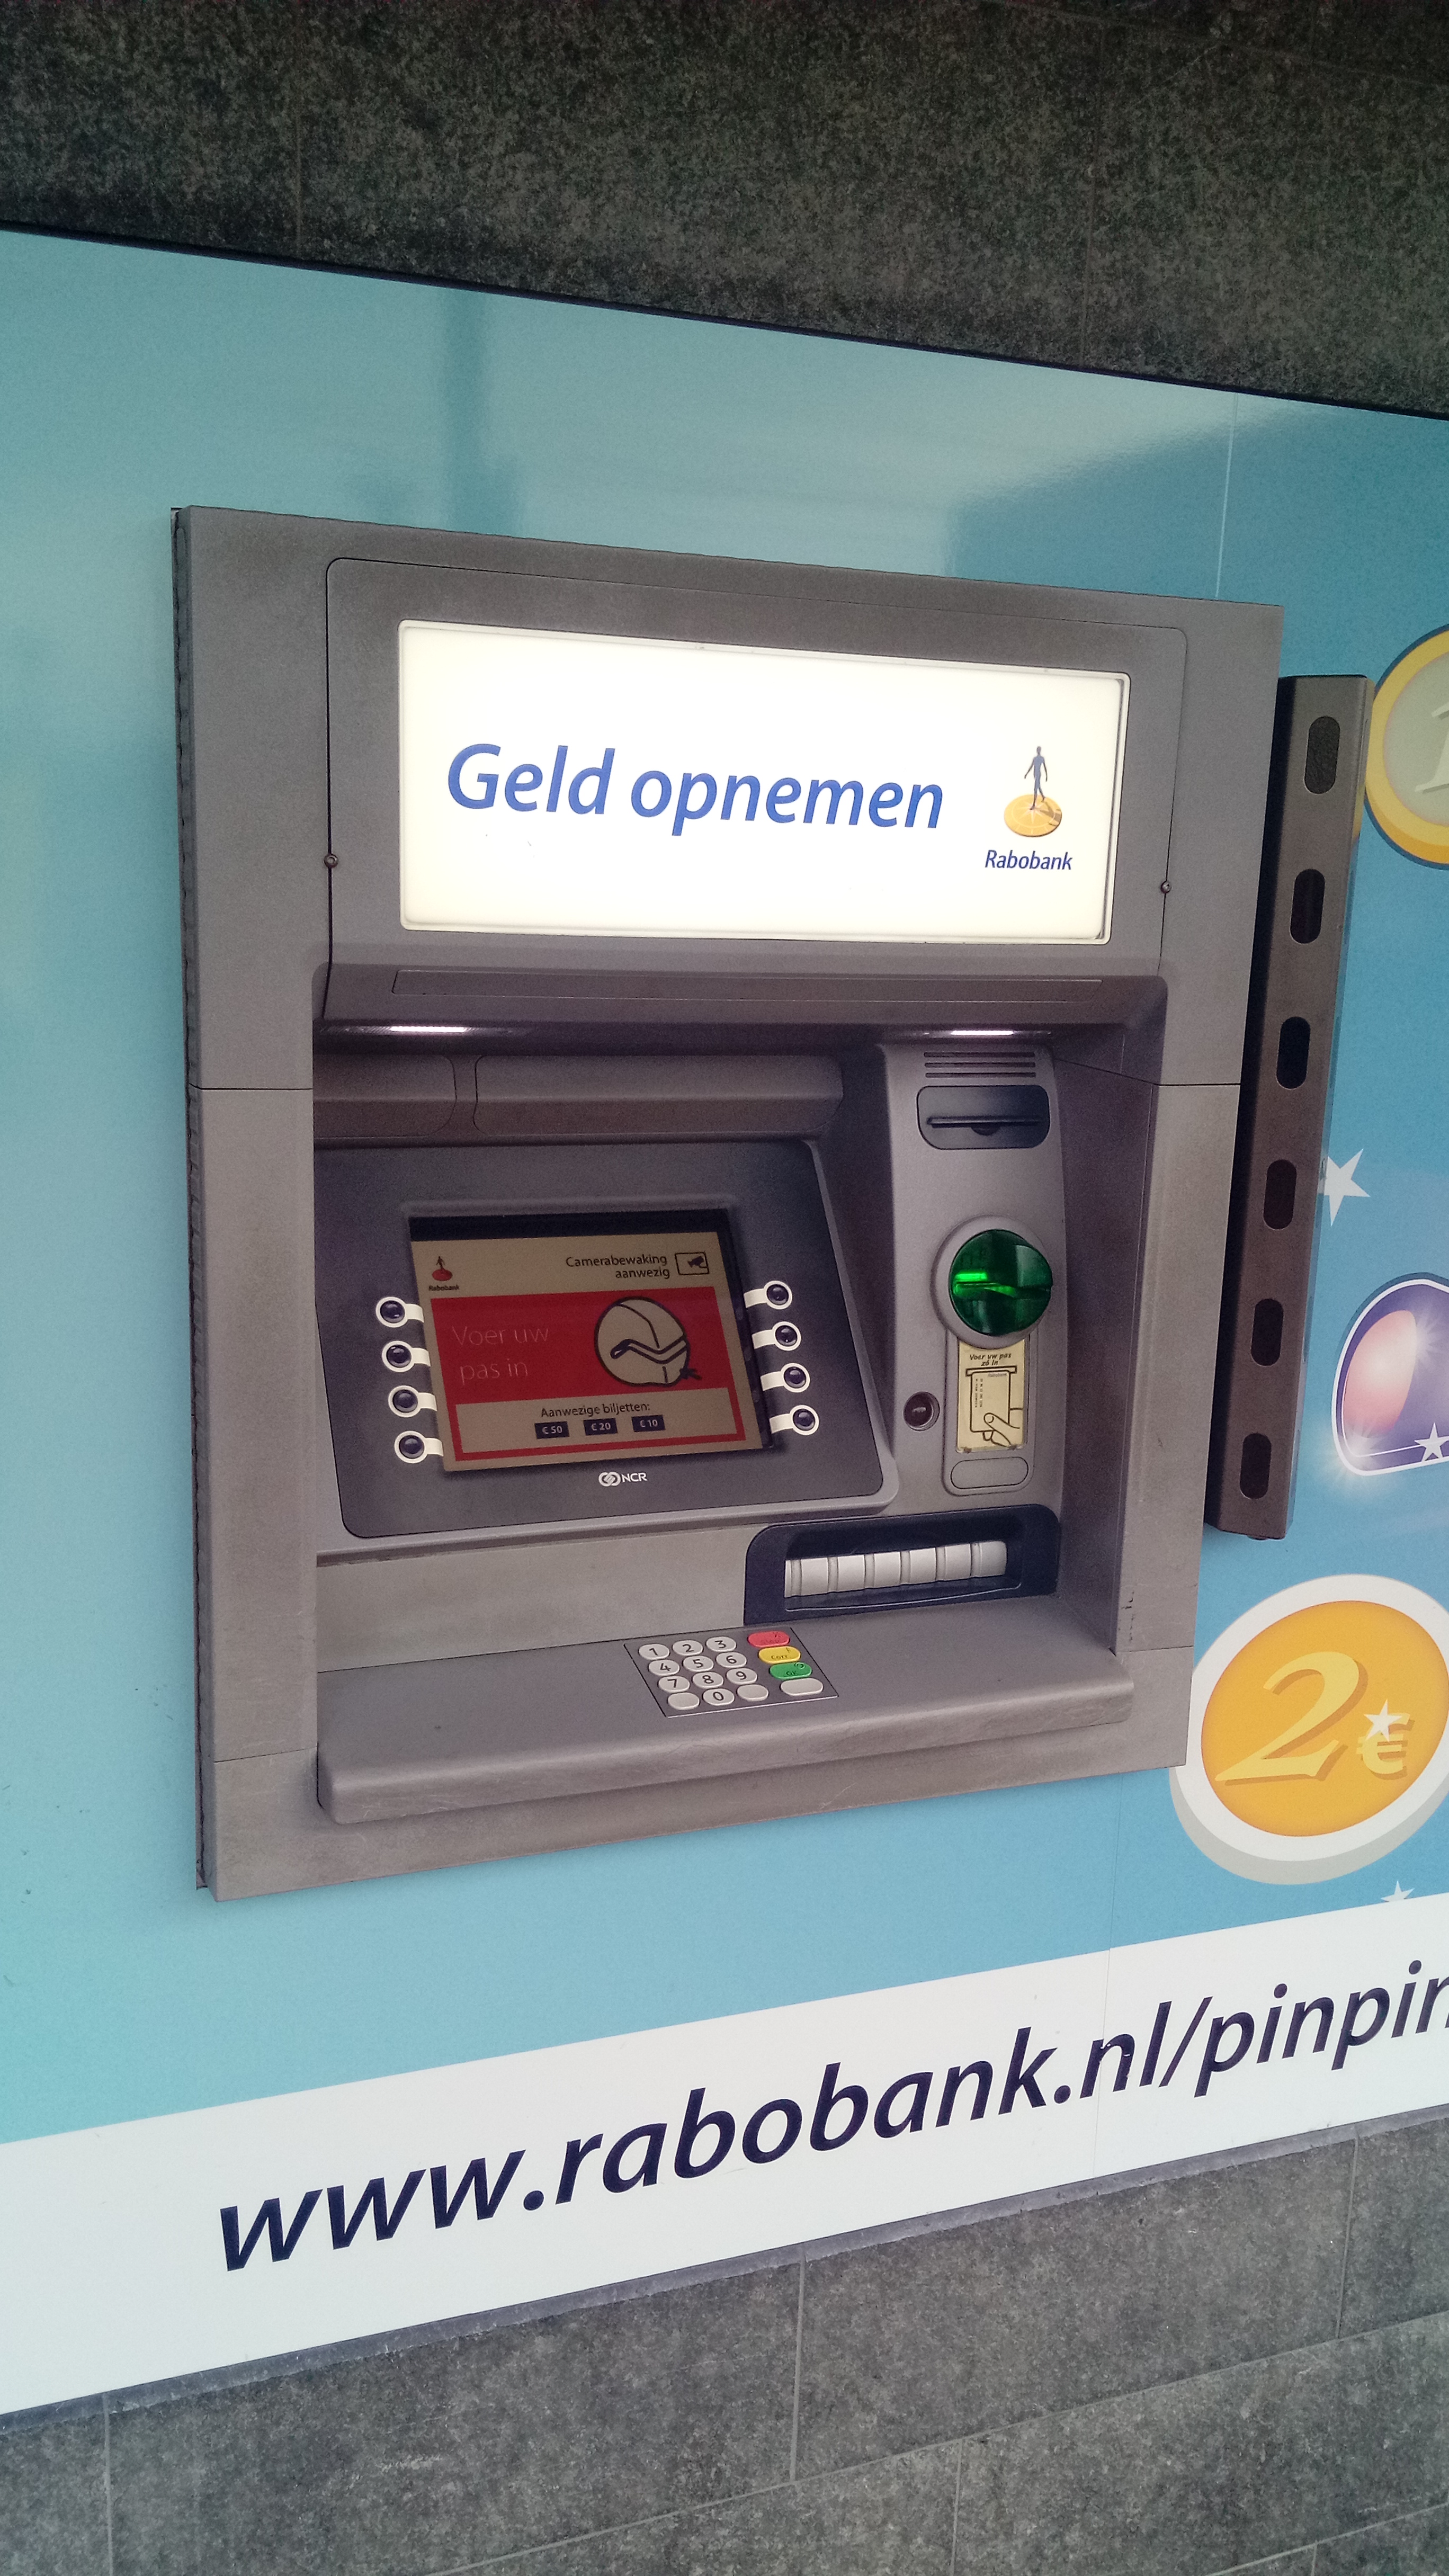 File:Rabobank automatic teller machine with Rabo PinPin, (2019) 11.jpg - Wikimedia Commons